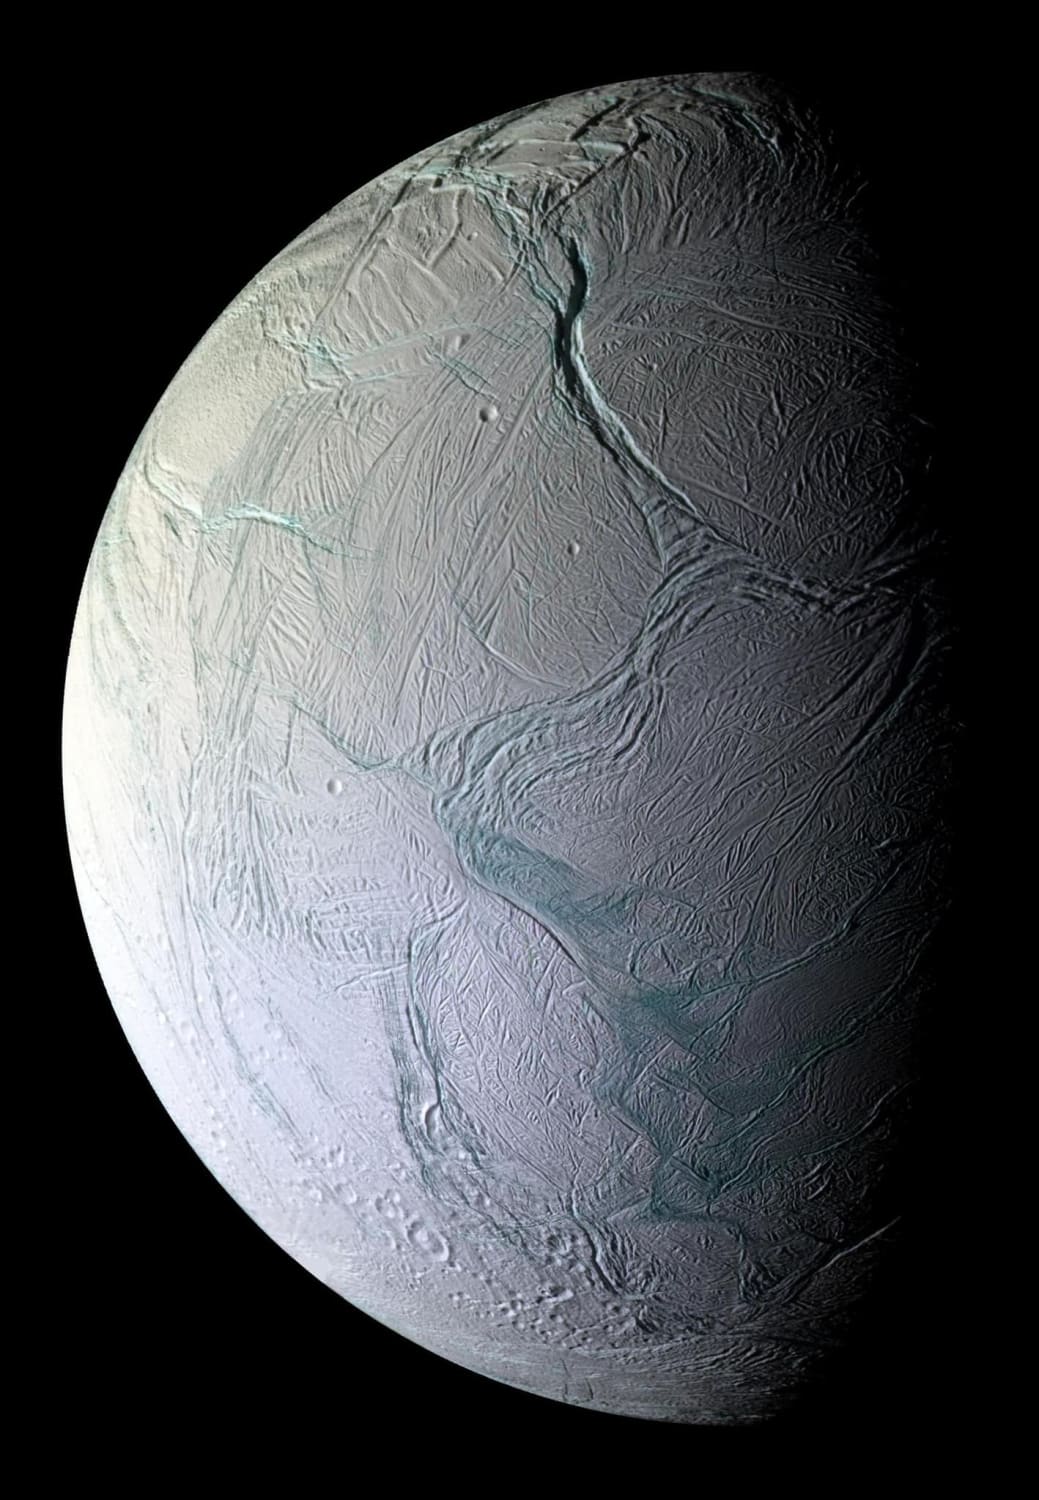 Enceladus moon of Saturn. This picture is composition of 28 photos taken by Cassini in 2008.